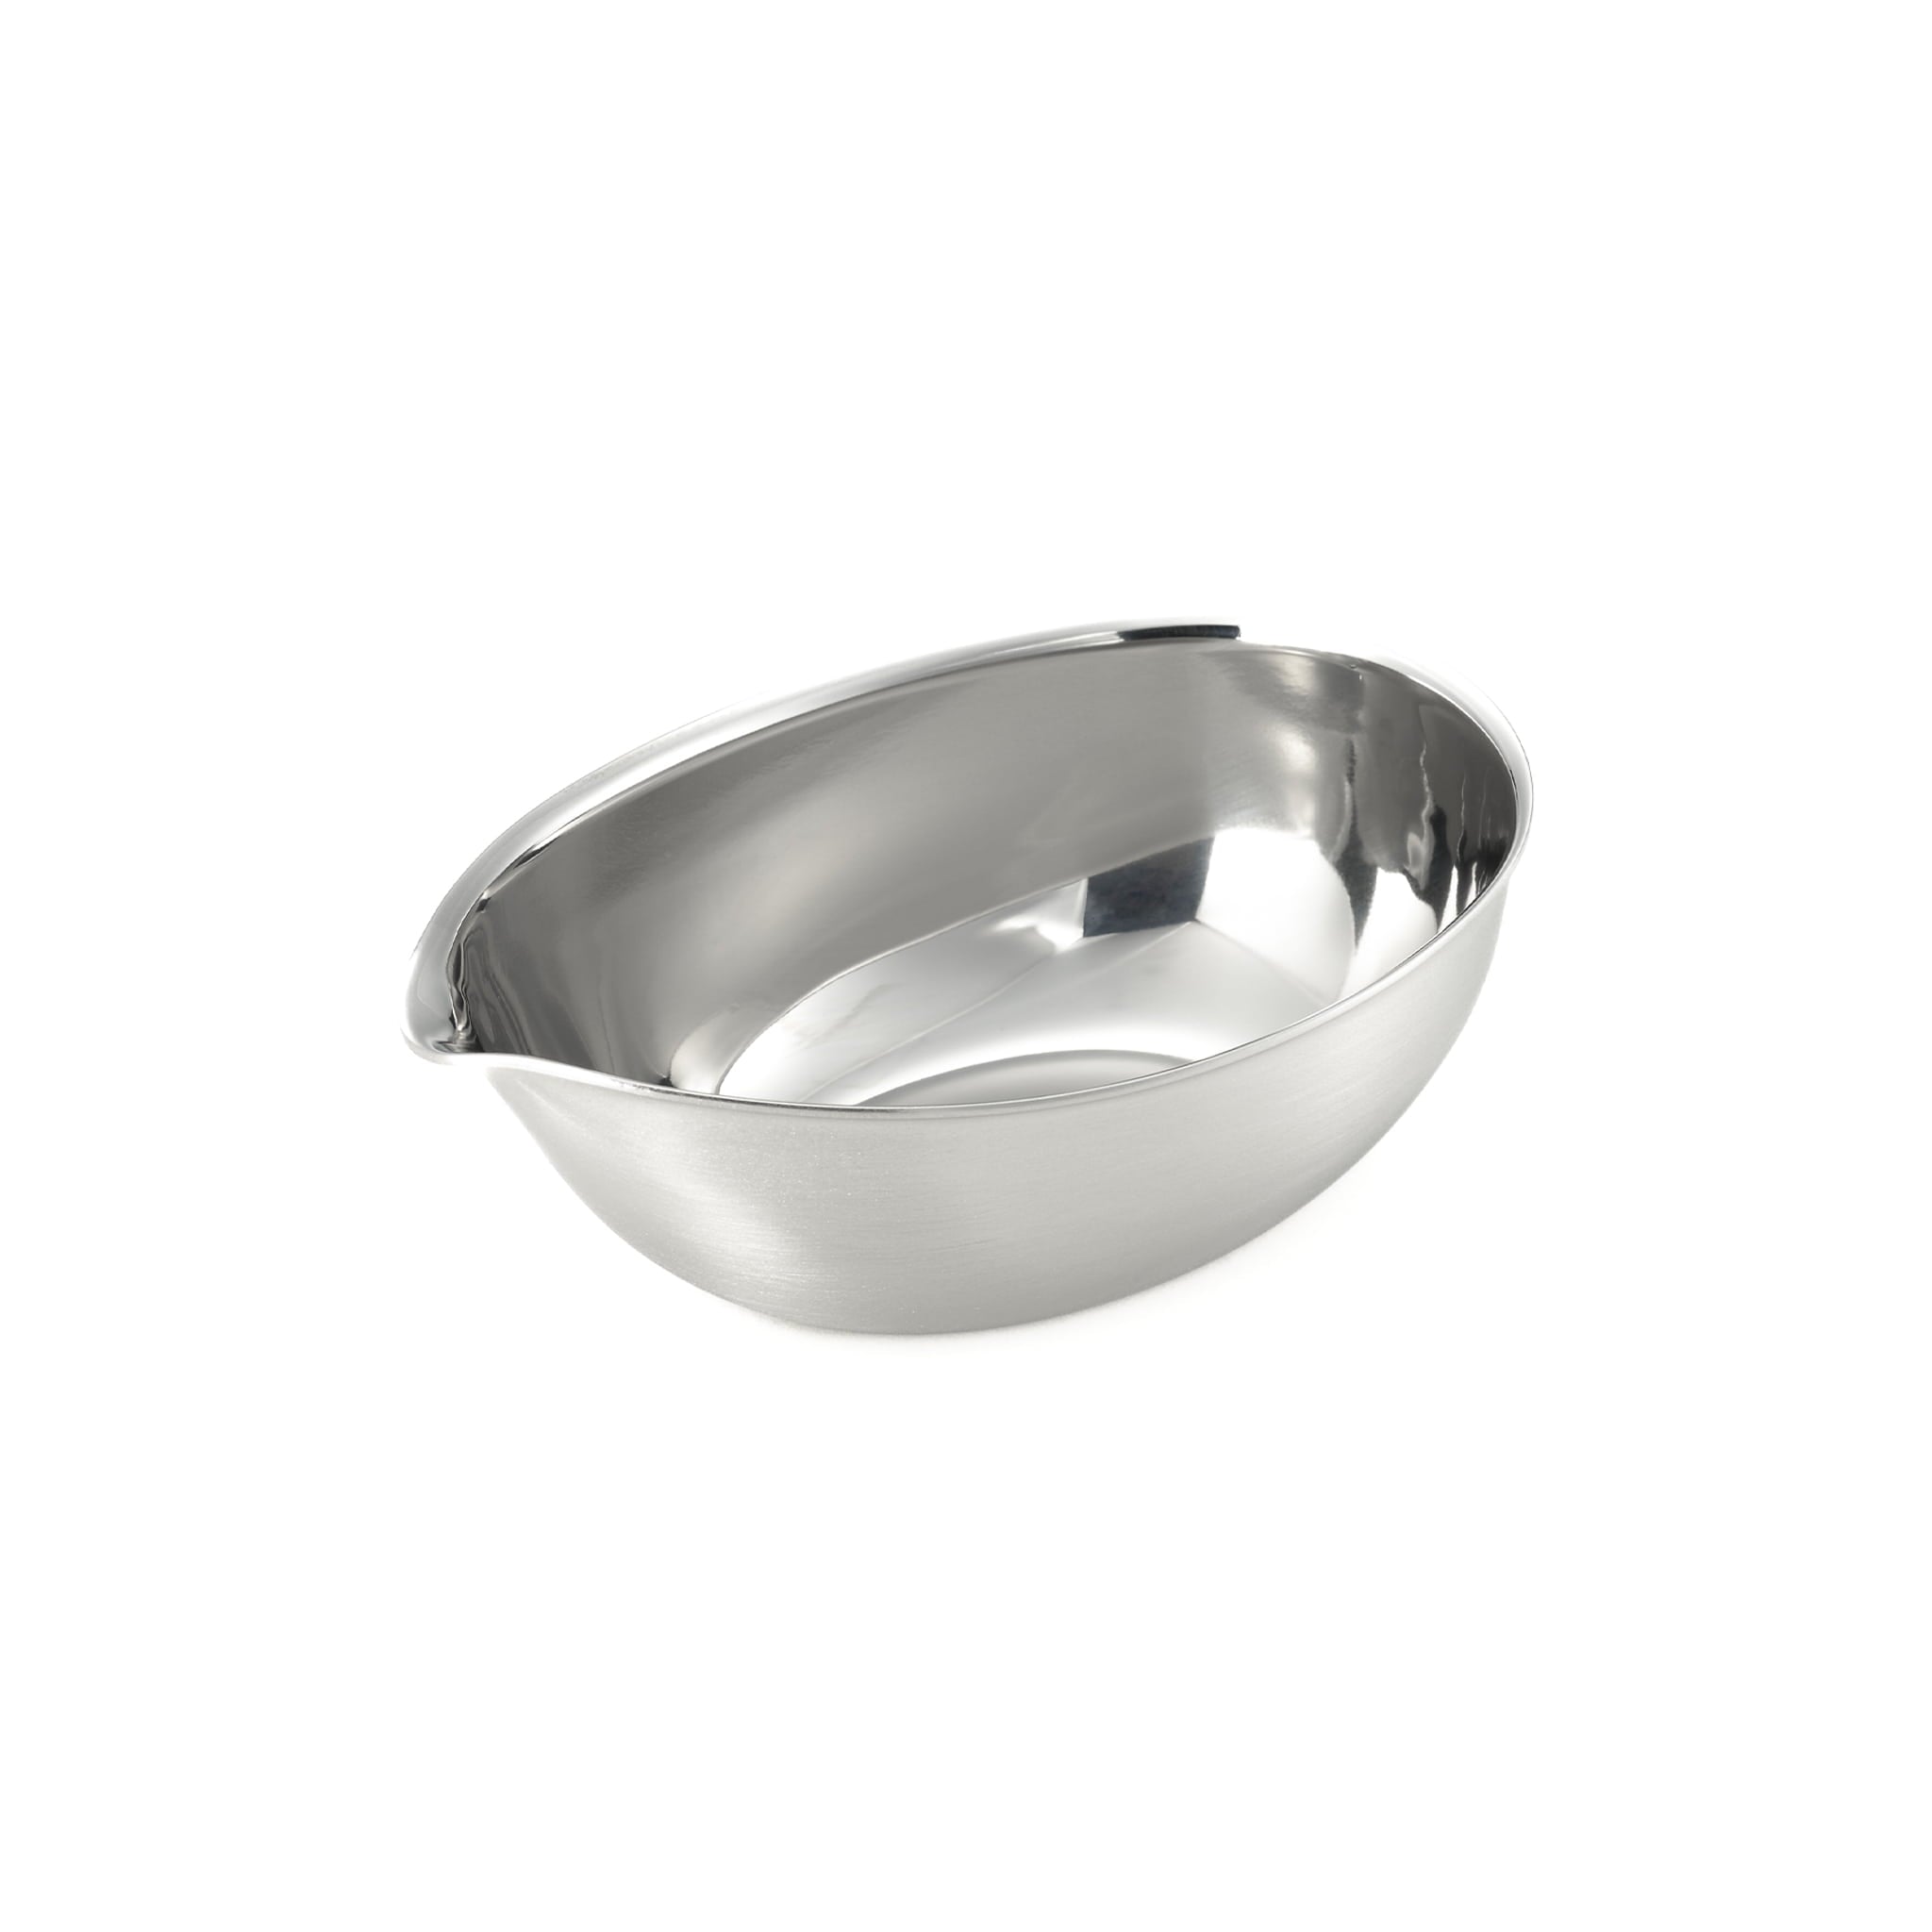 Japanese Stainless Steel Oval Prep Bowl with Spout, 90ml